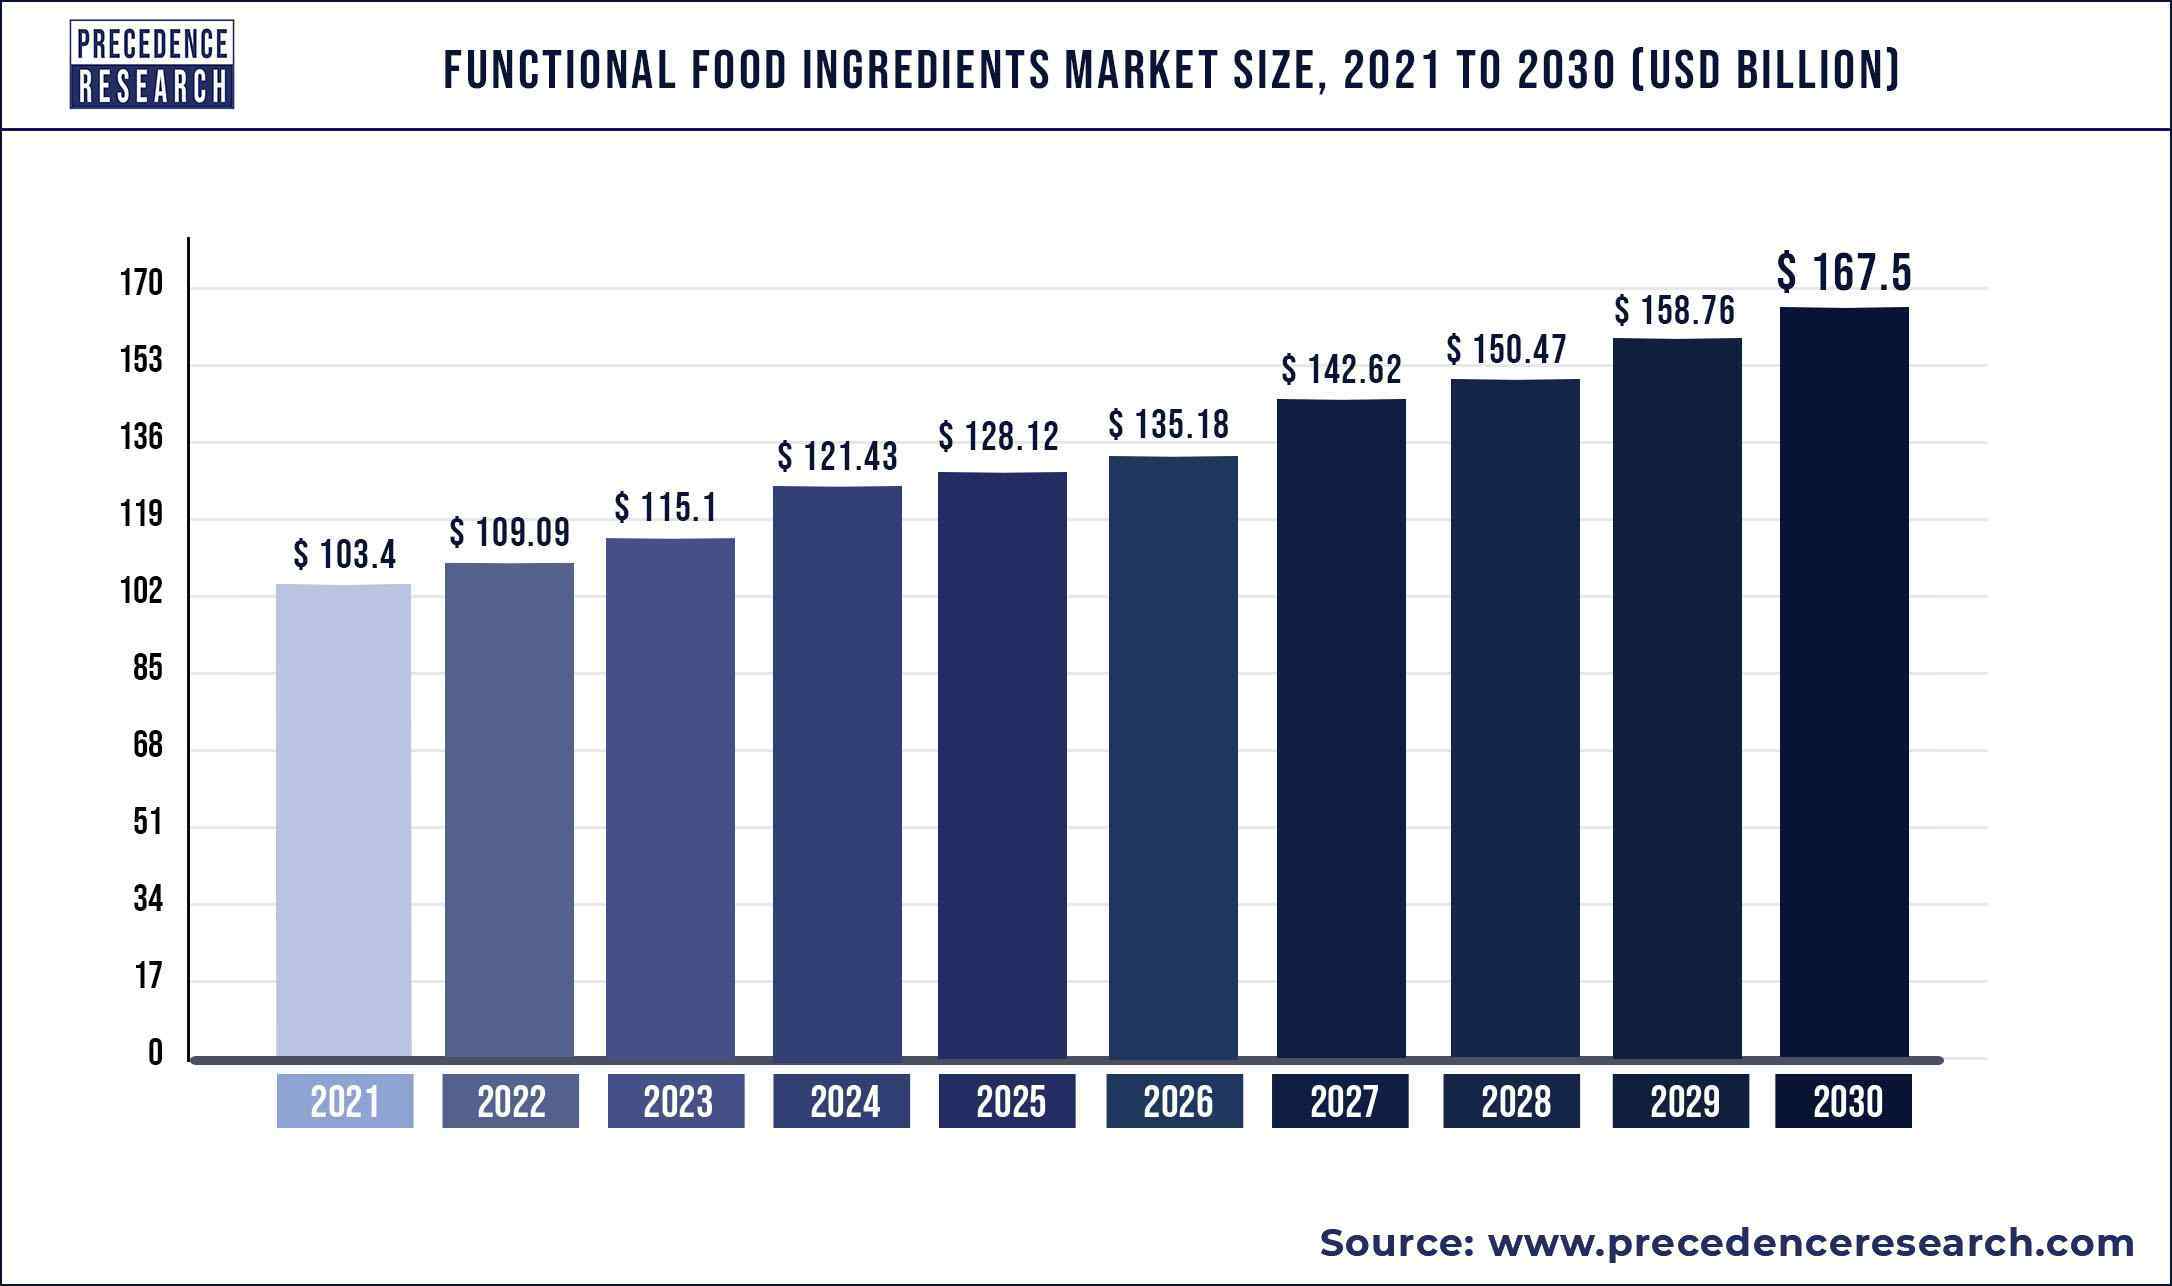 Functional Food Ingredients Market Size 2021 to 2030